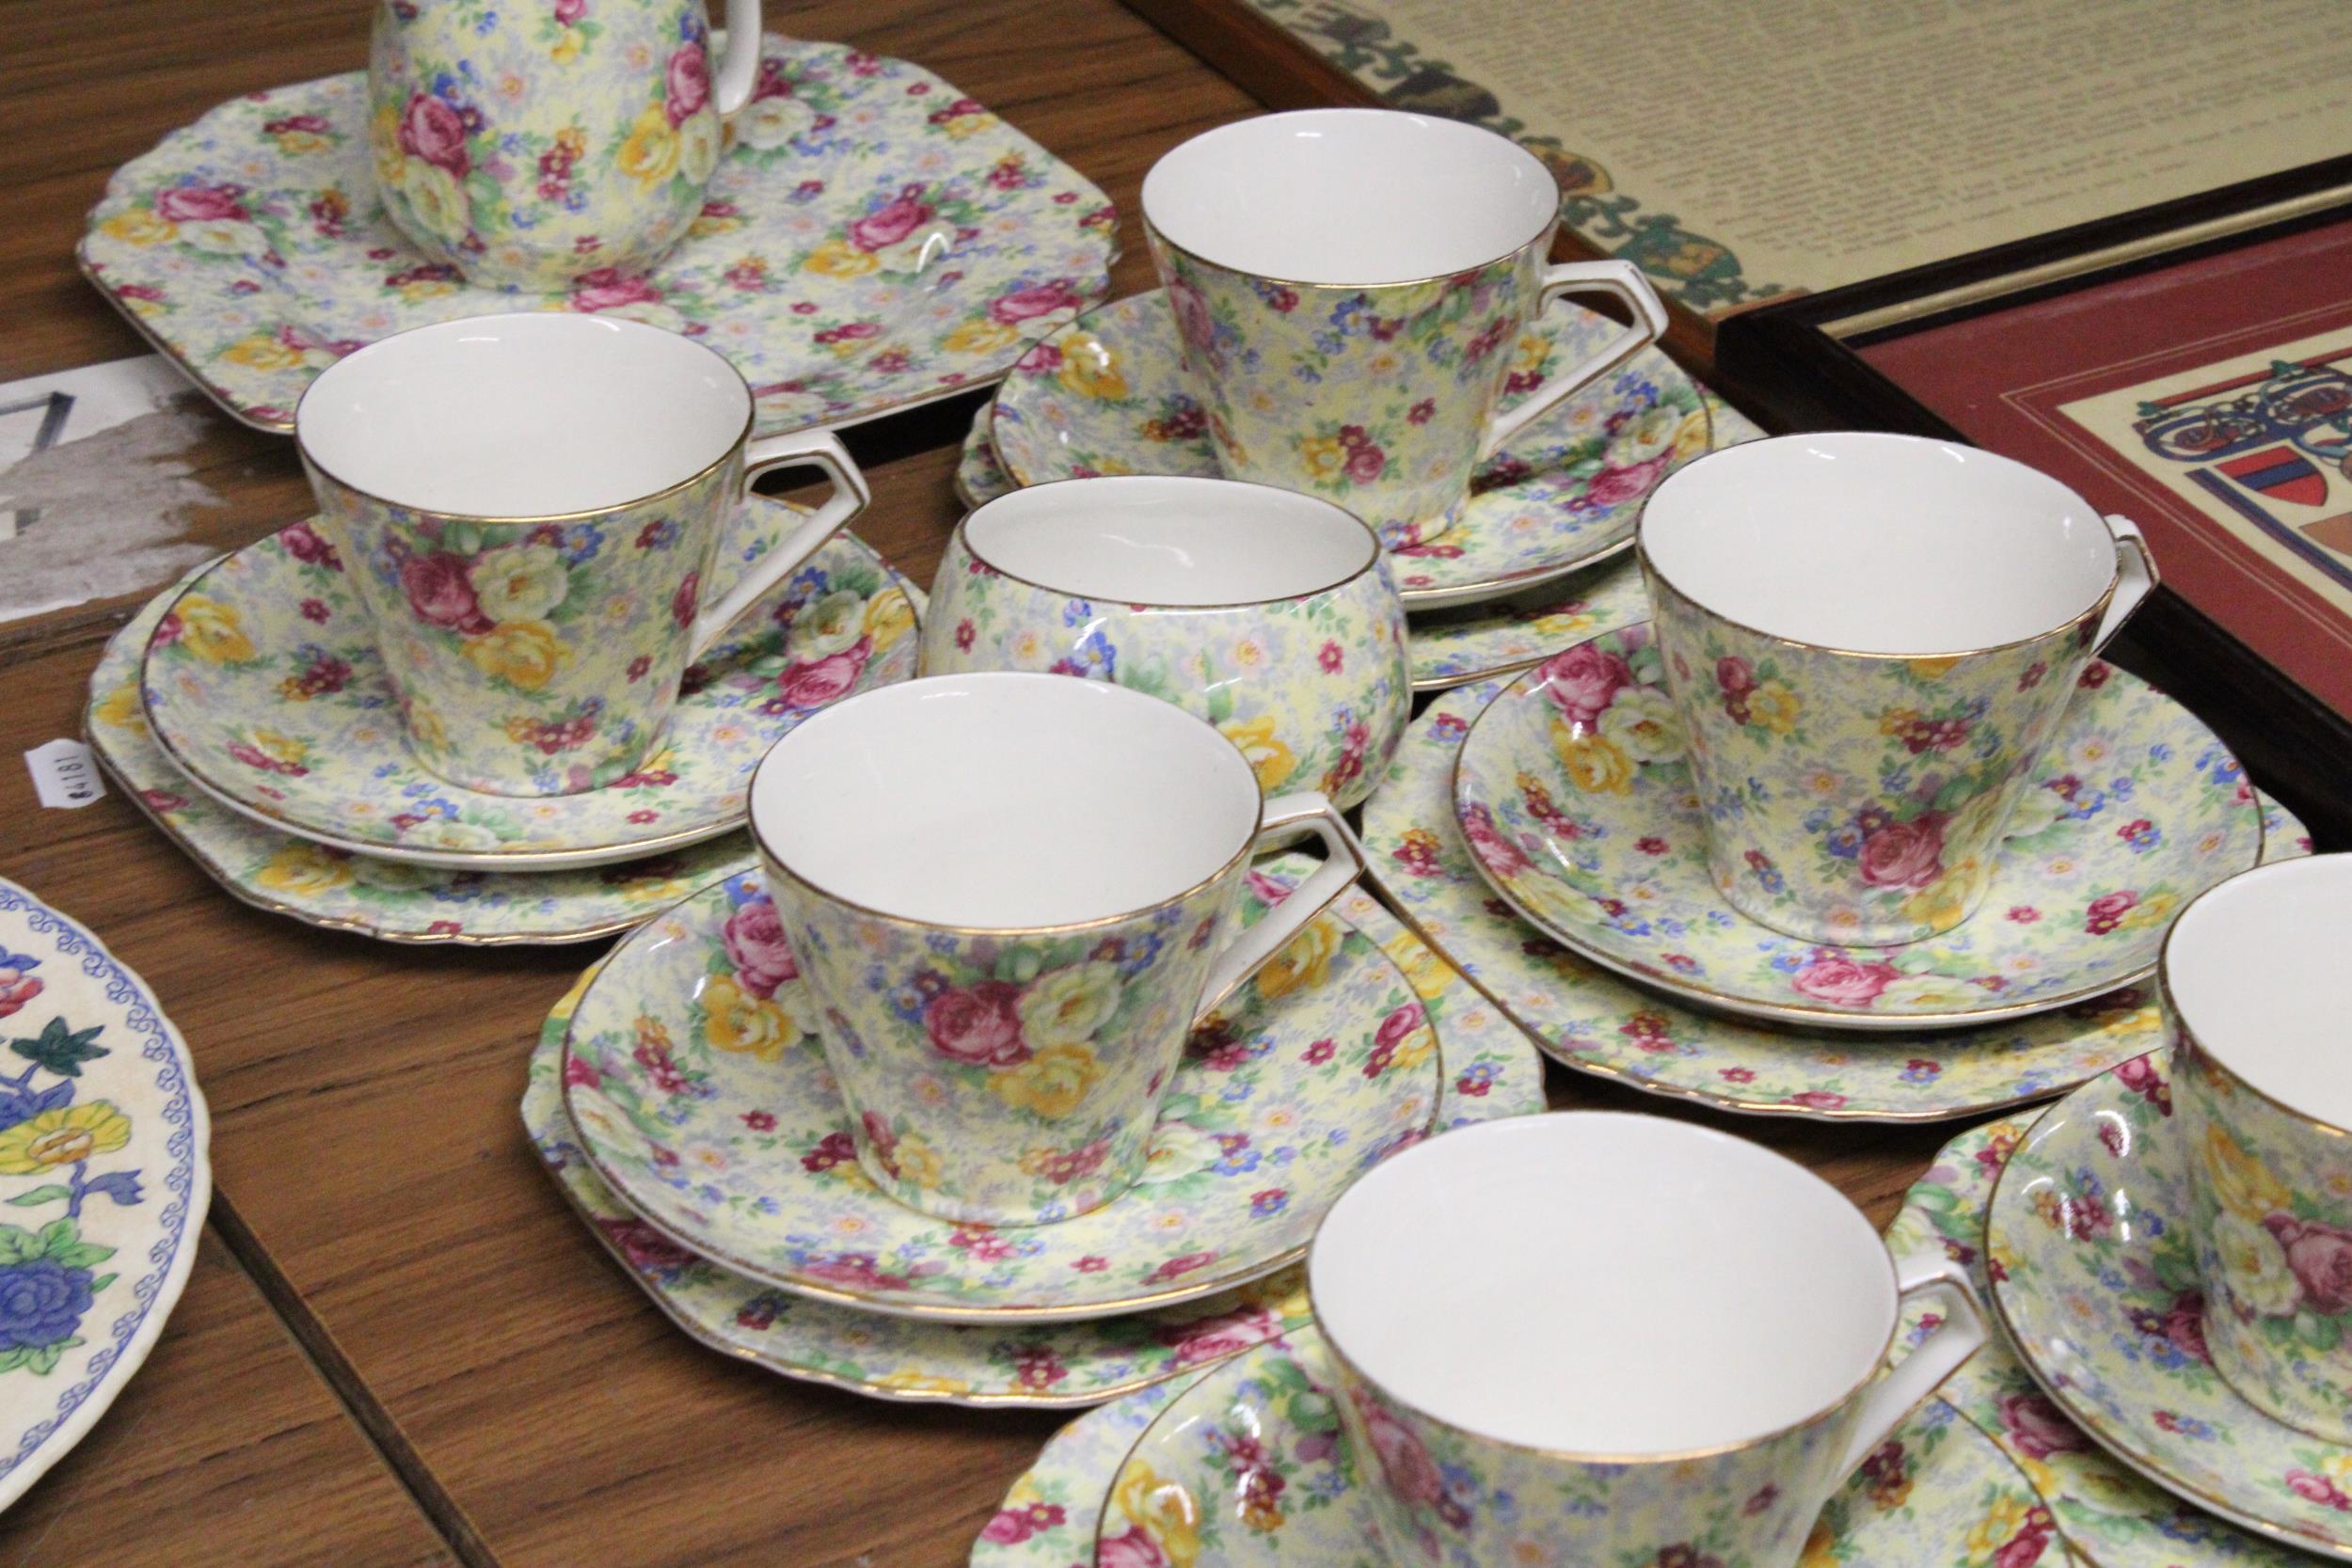 A LORD NELSON CHINTZ TEASET TO INCLUDE A CAKE PLATE, CREAM JUG, SUGAR BOWL, CUPS, SAUCERS AND SIDE - Image 3 of 5